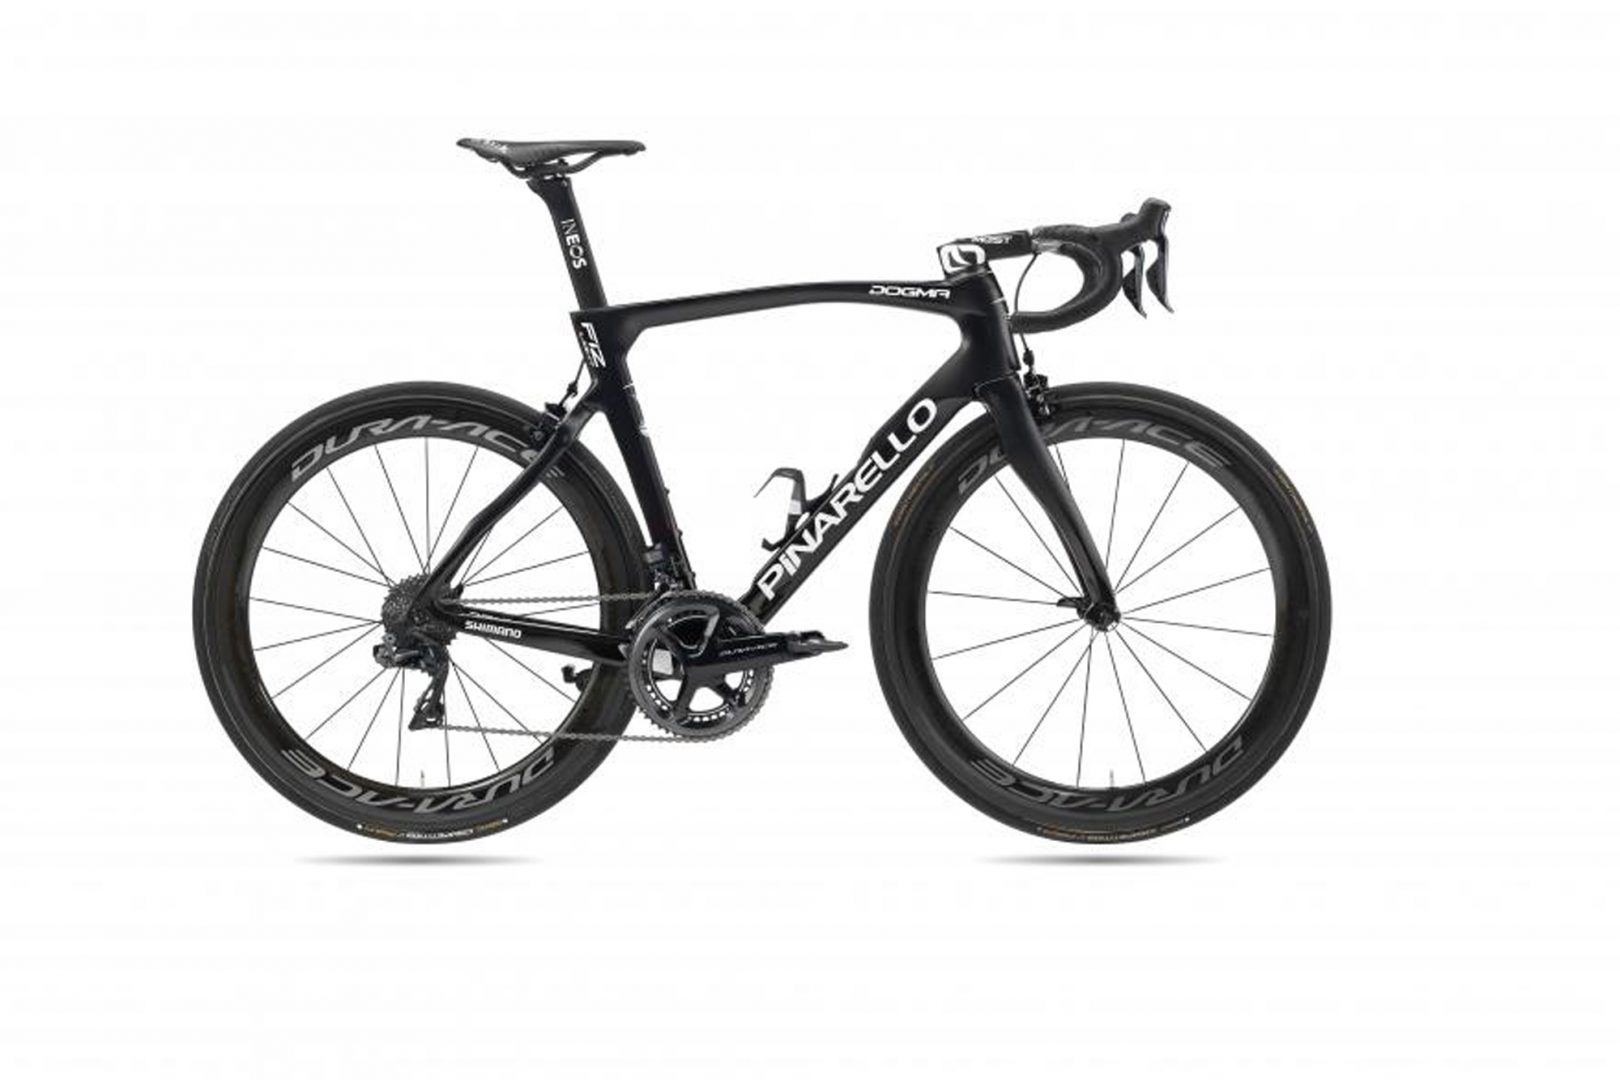 https://www.cyclingweekly.com/news/product-news/pinarello-launch-new-dogma-f12-x-light-frame-6200-price-tag-427047